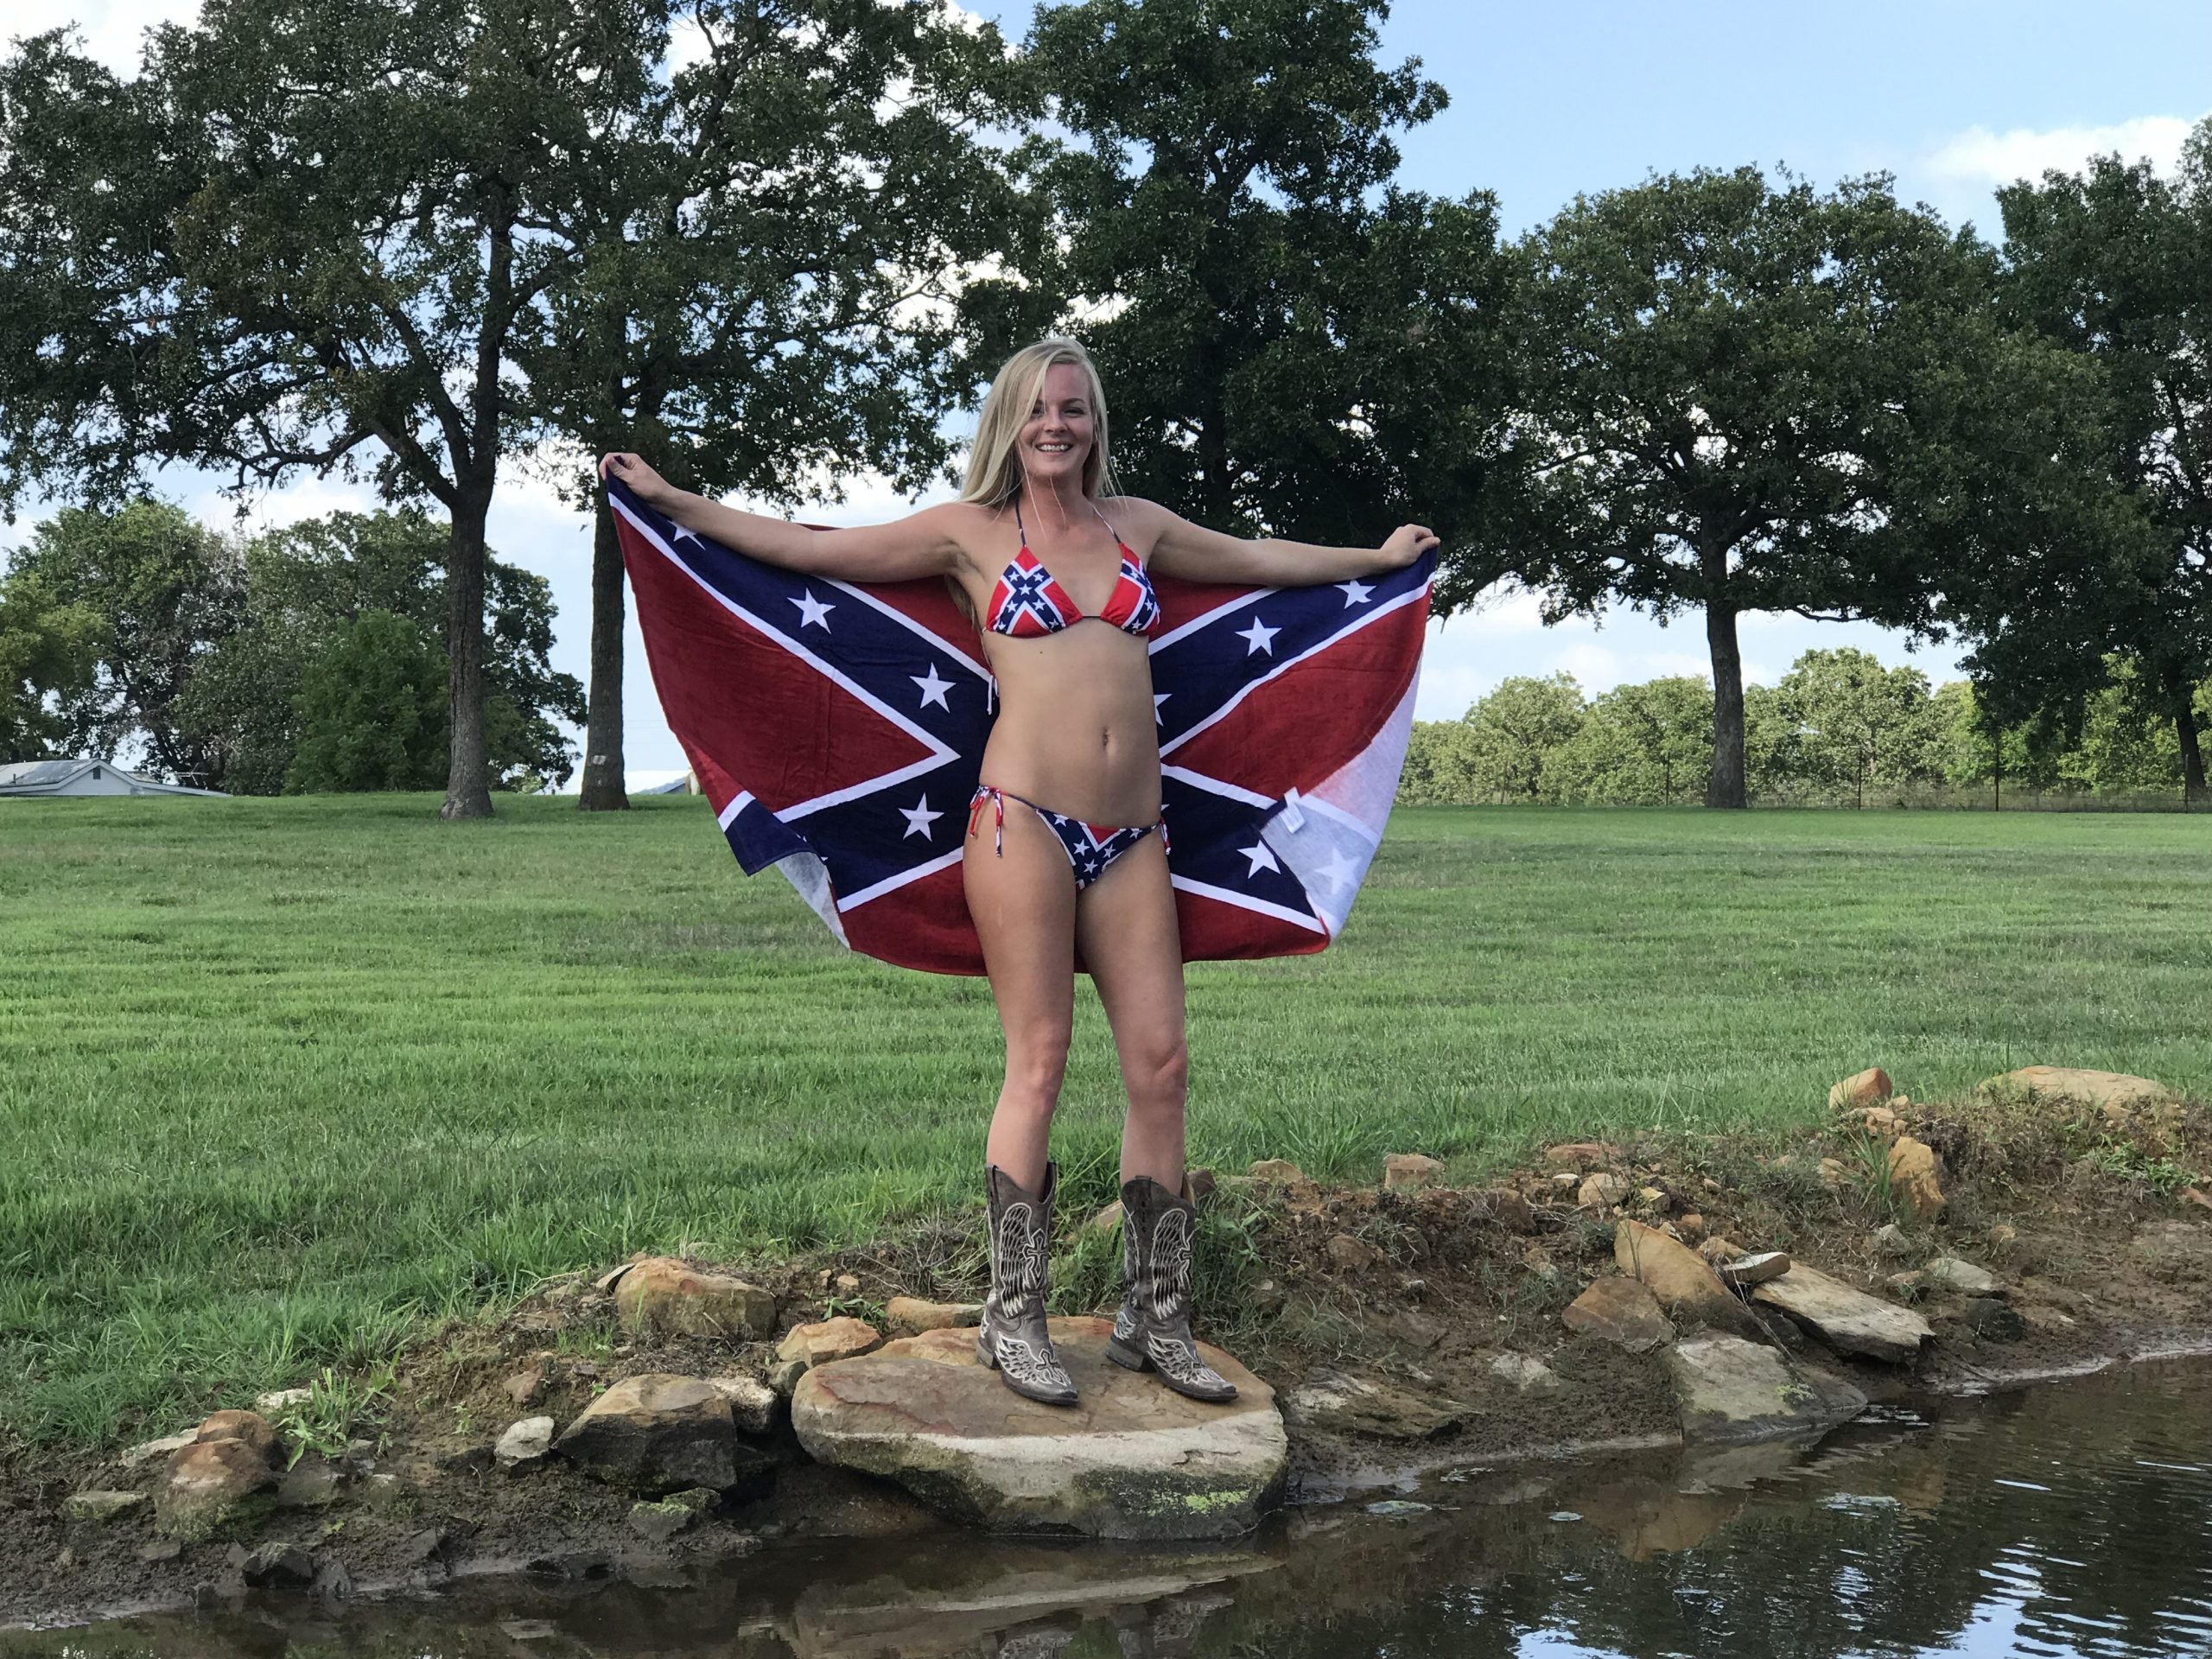 brad keltner recommends confederate flag g string pic